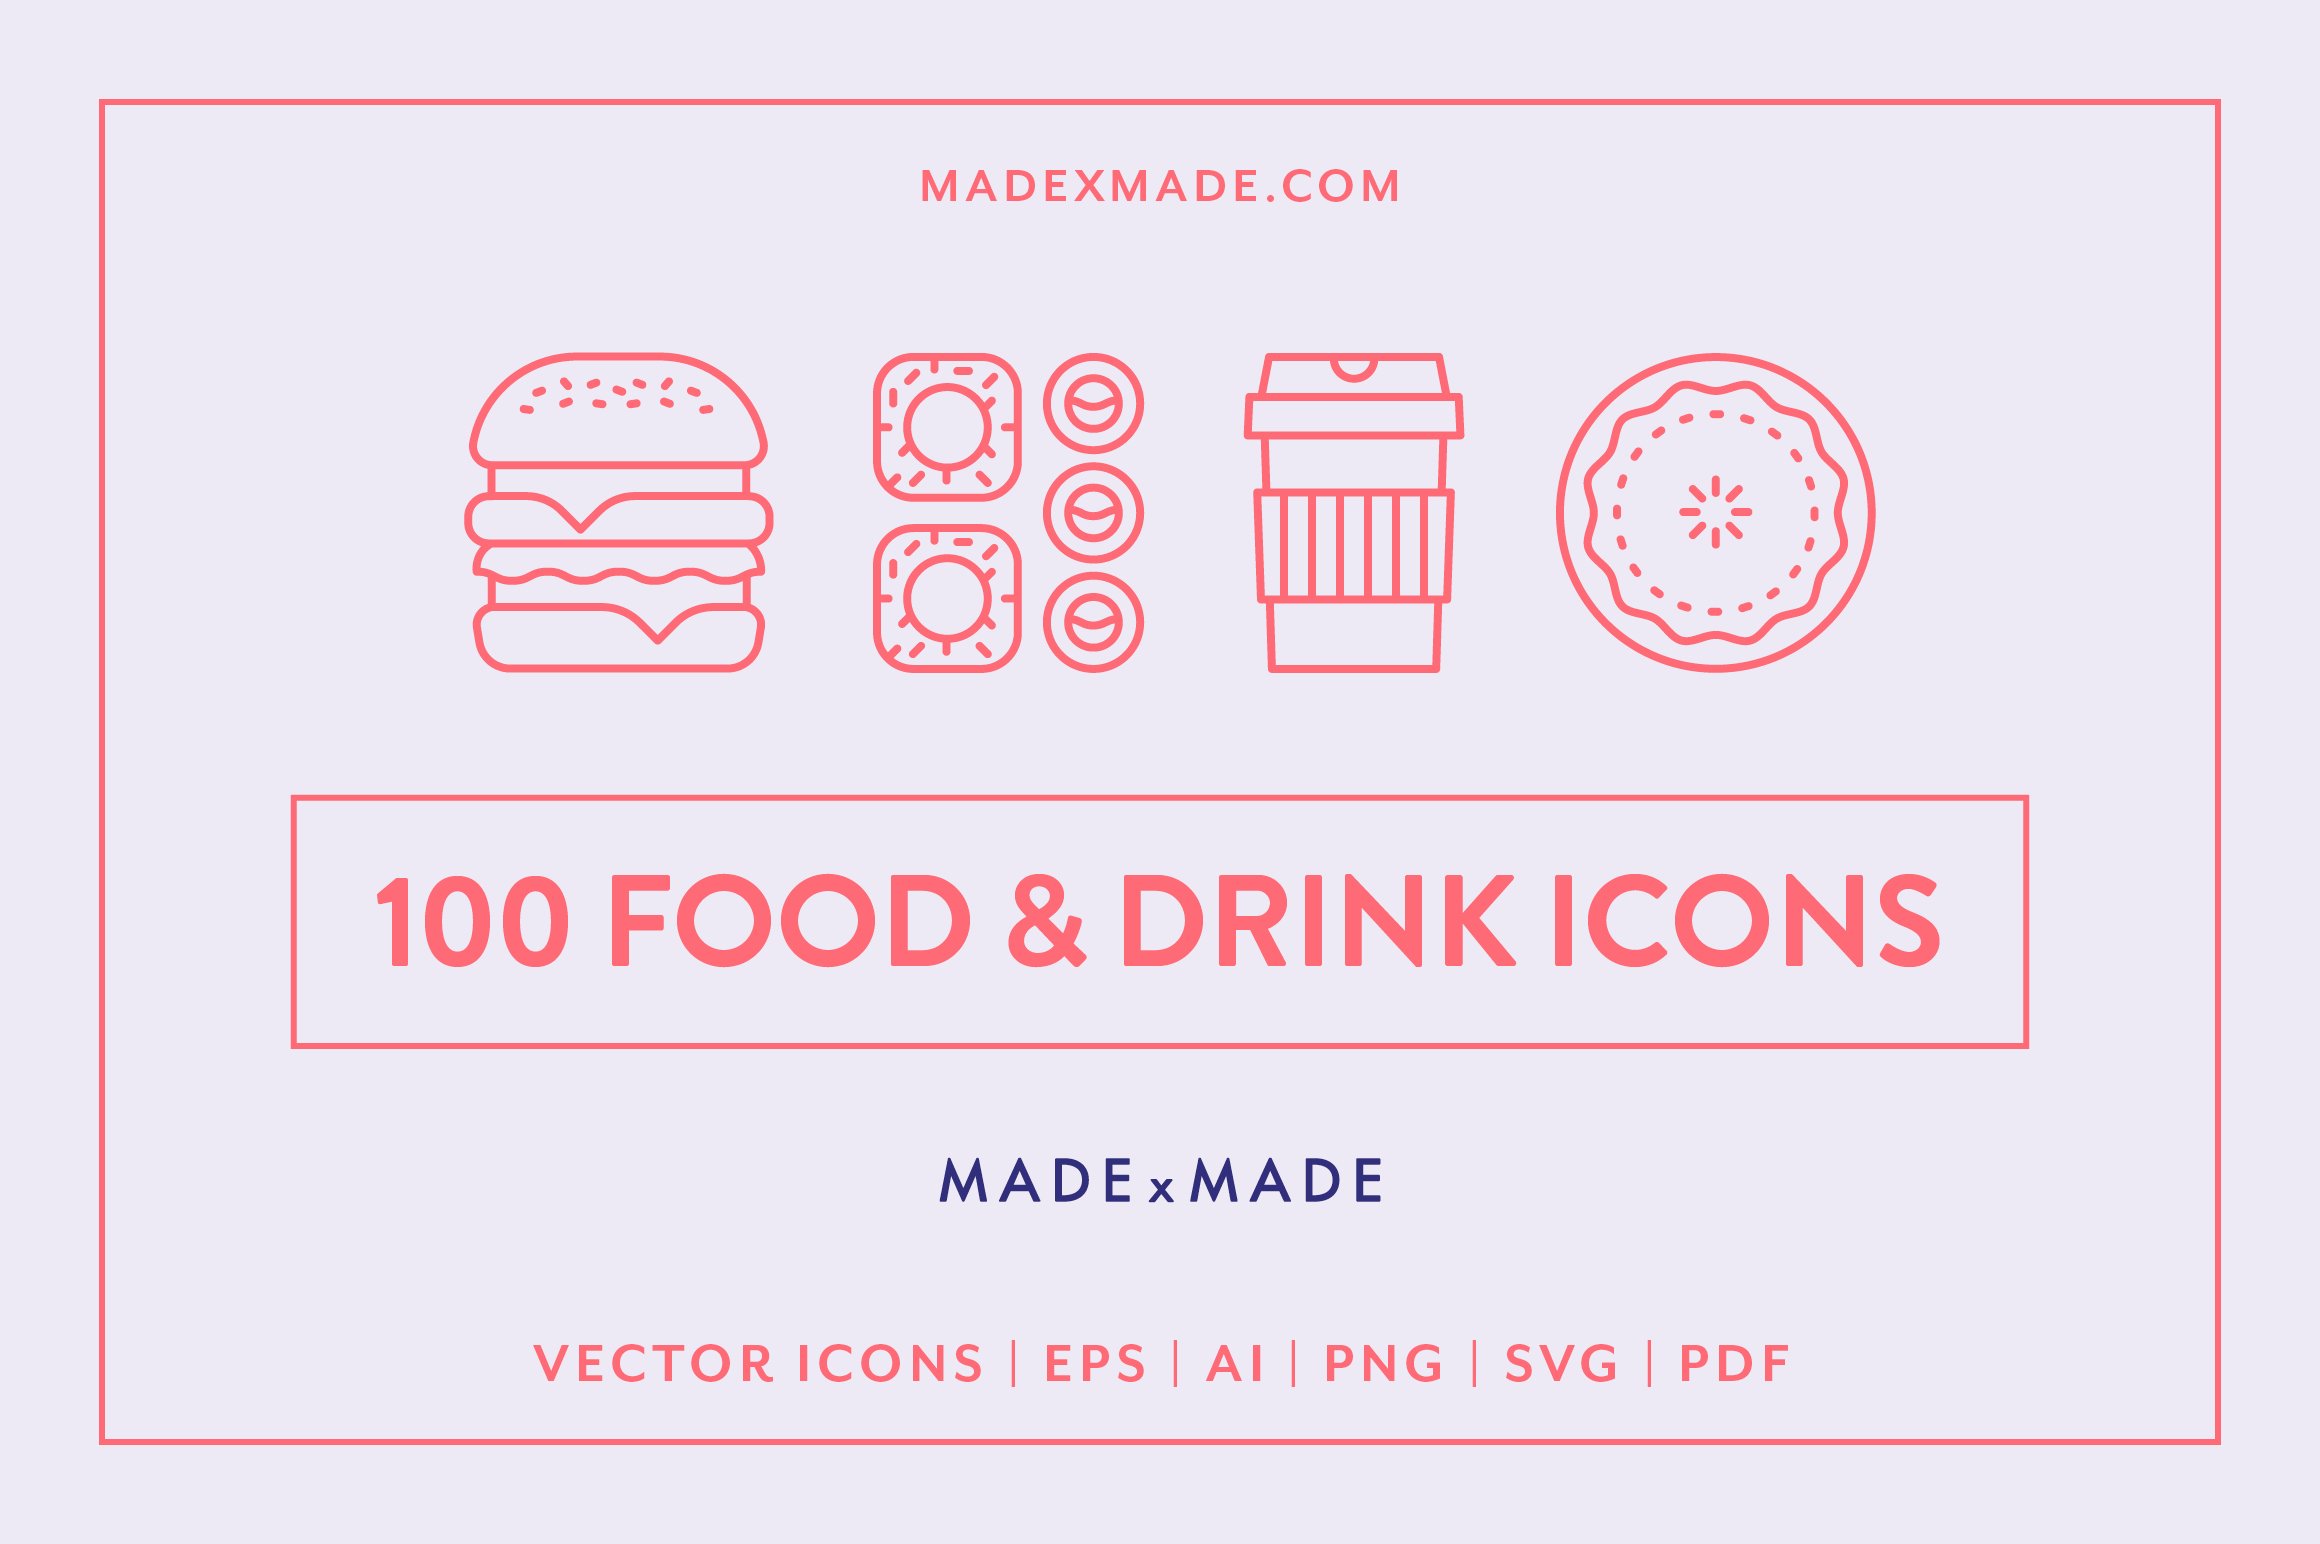 Food & Drink Line Icons cover image.